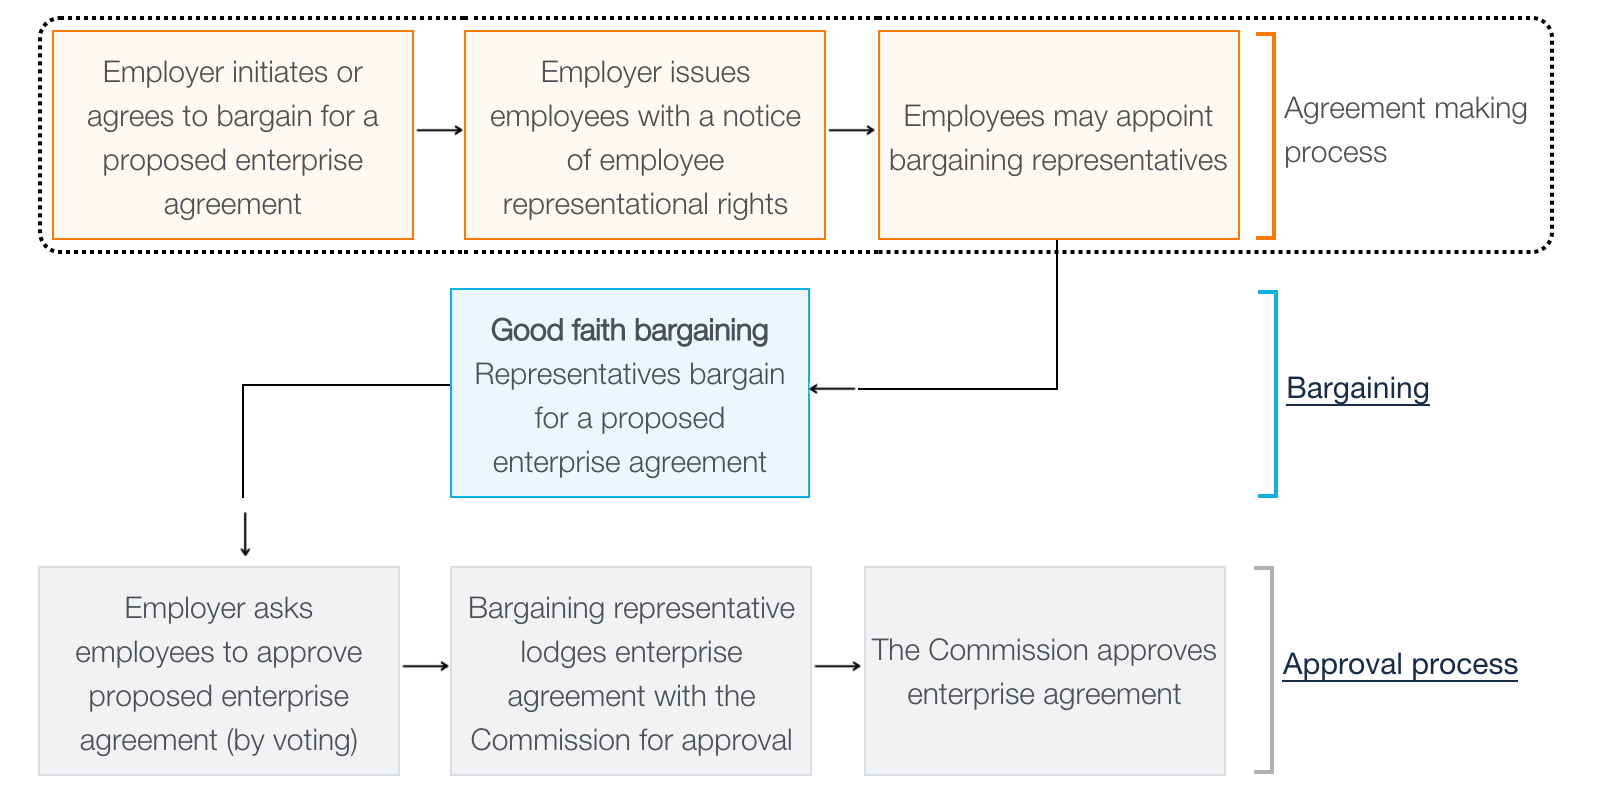 Stage in bargaining process